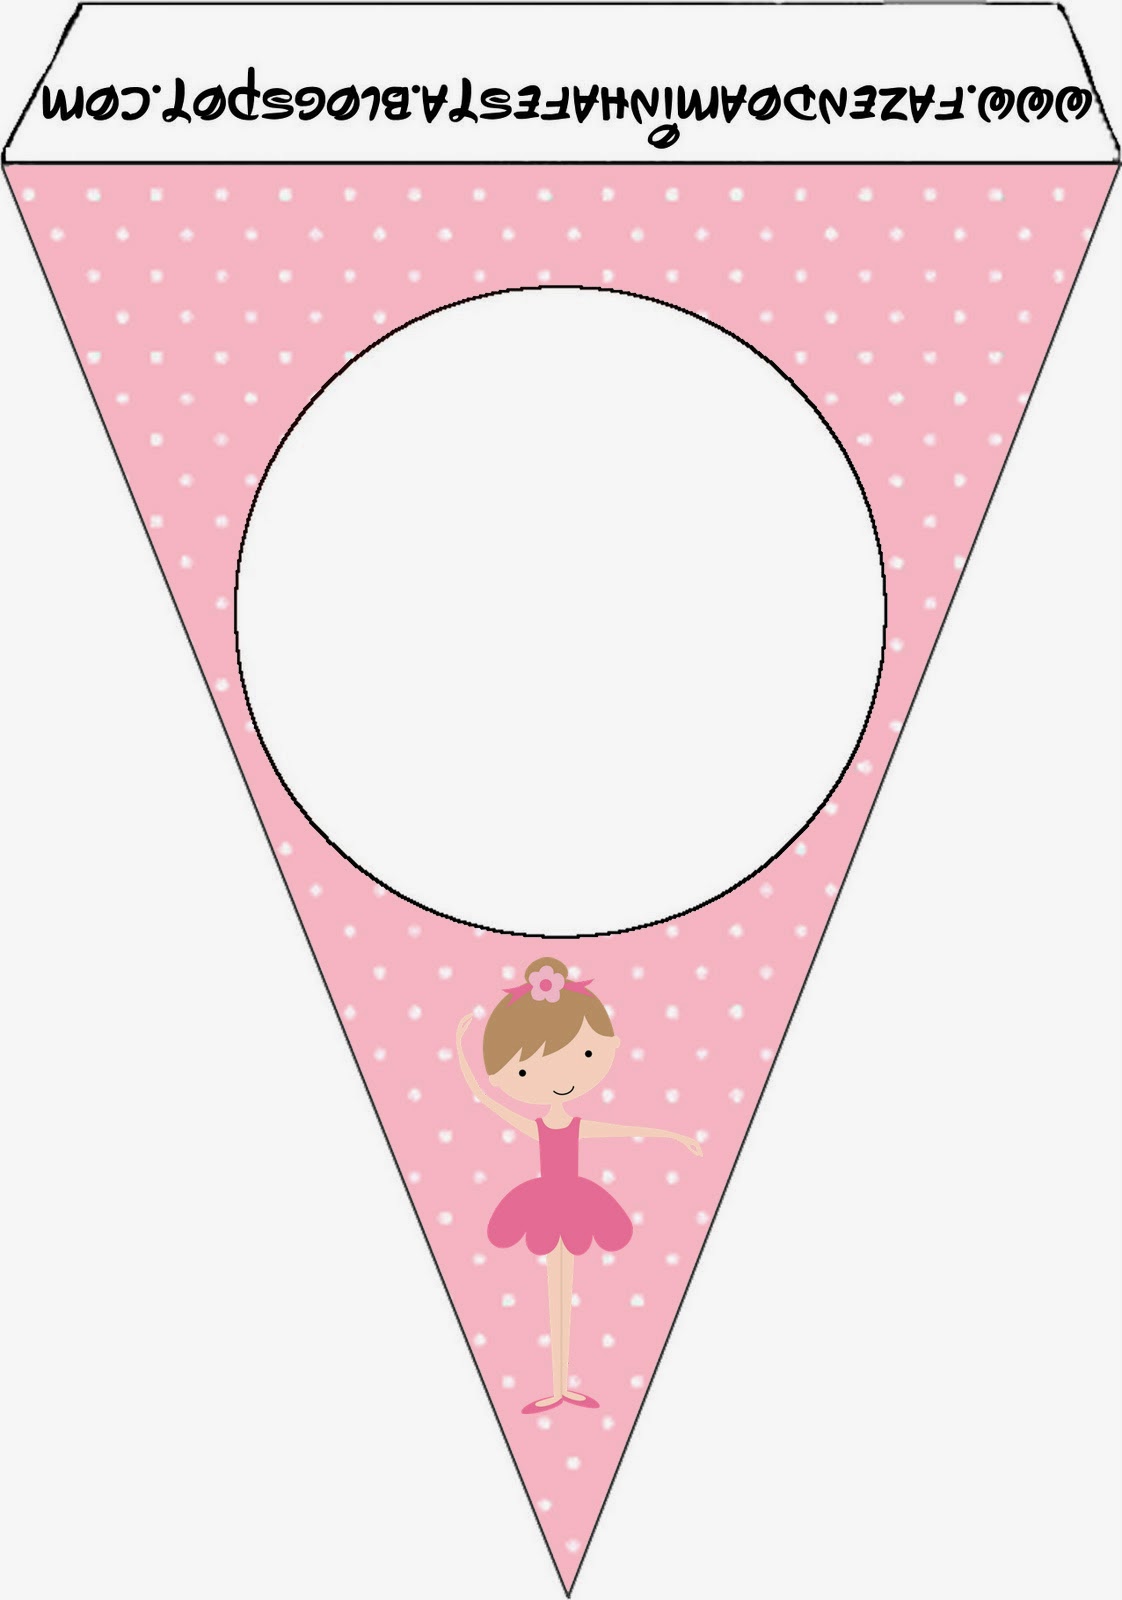 Pretty Free Party Printables. - Oh My Fiesta! in english